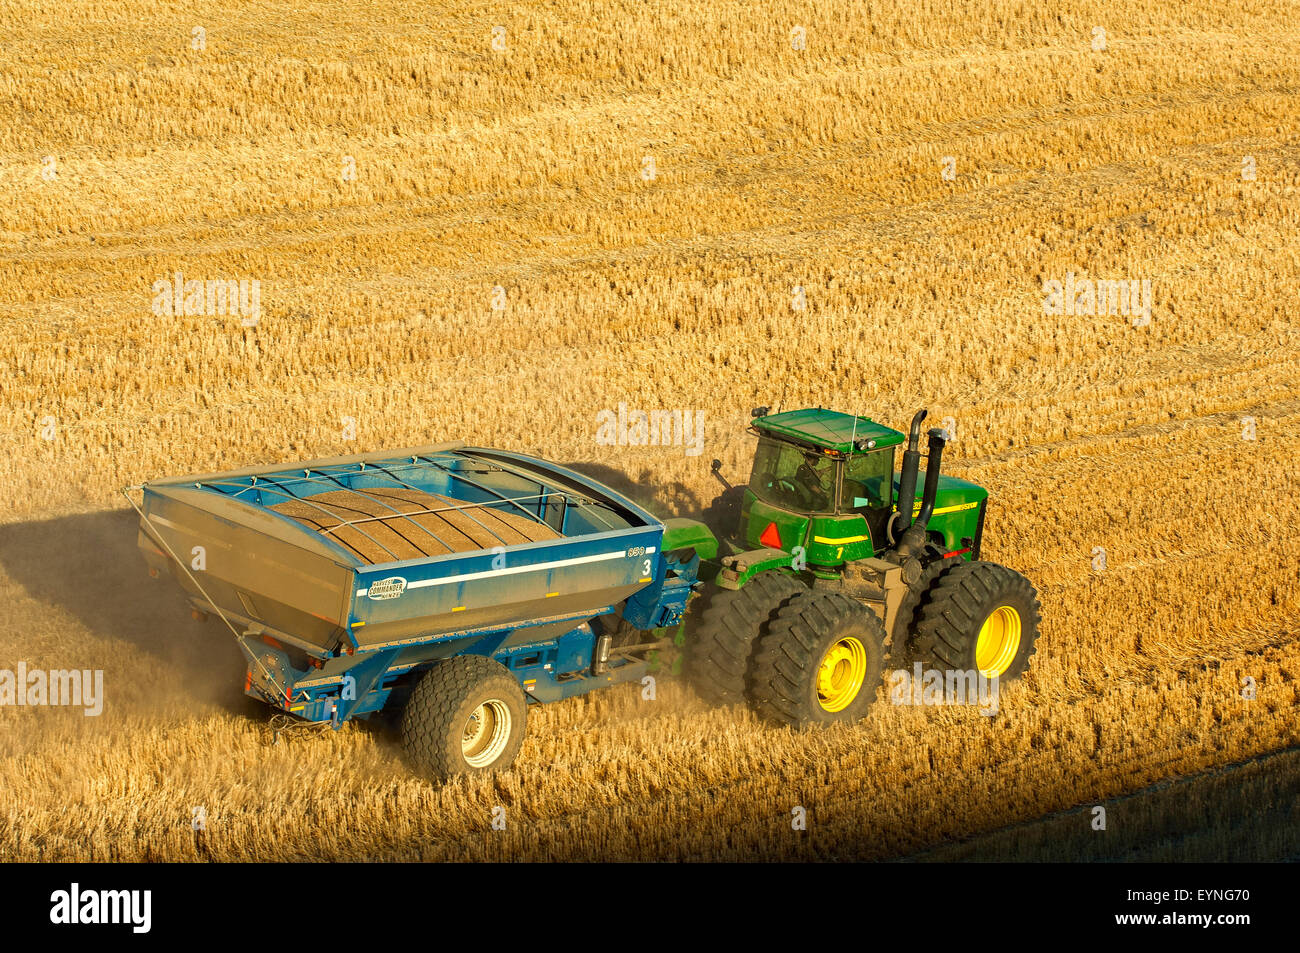 A tractor pulling  a loaded grain cart traverses a hillside field during harvest in the Palouse region of Washington Stock Photo